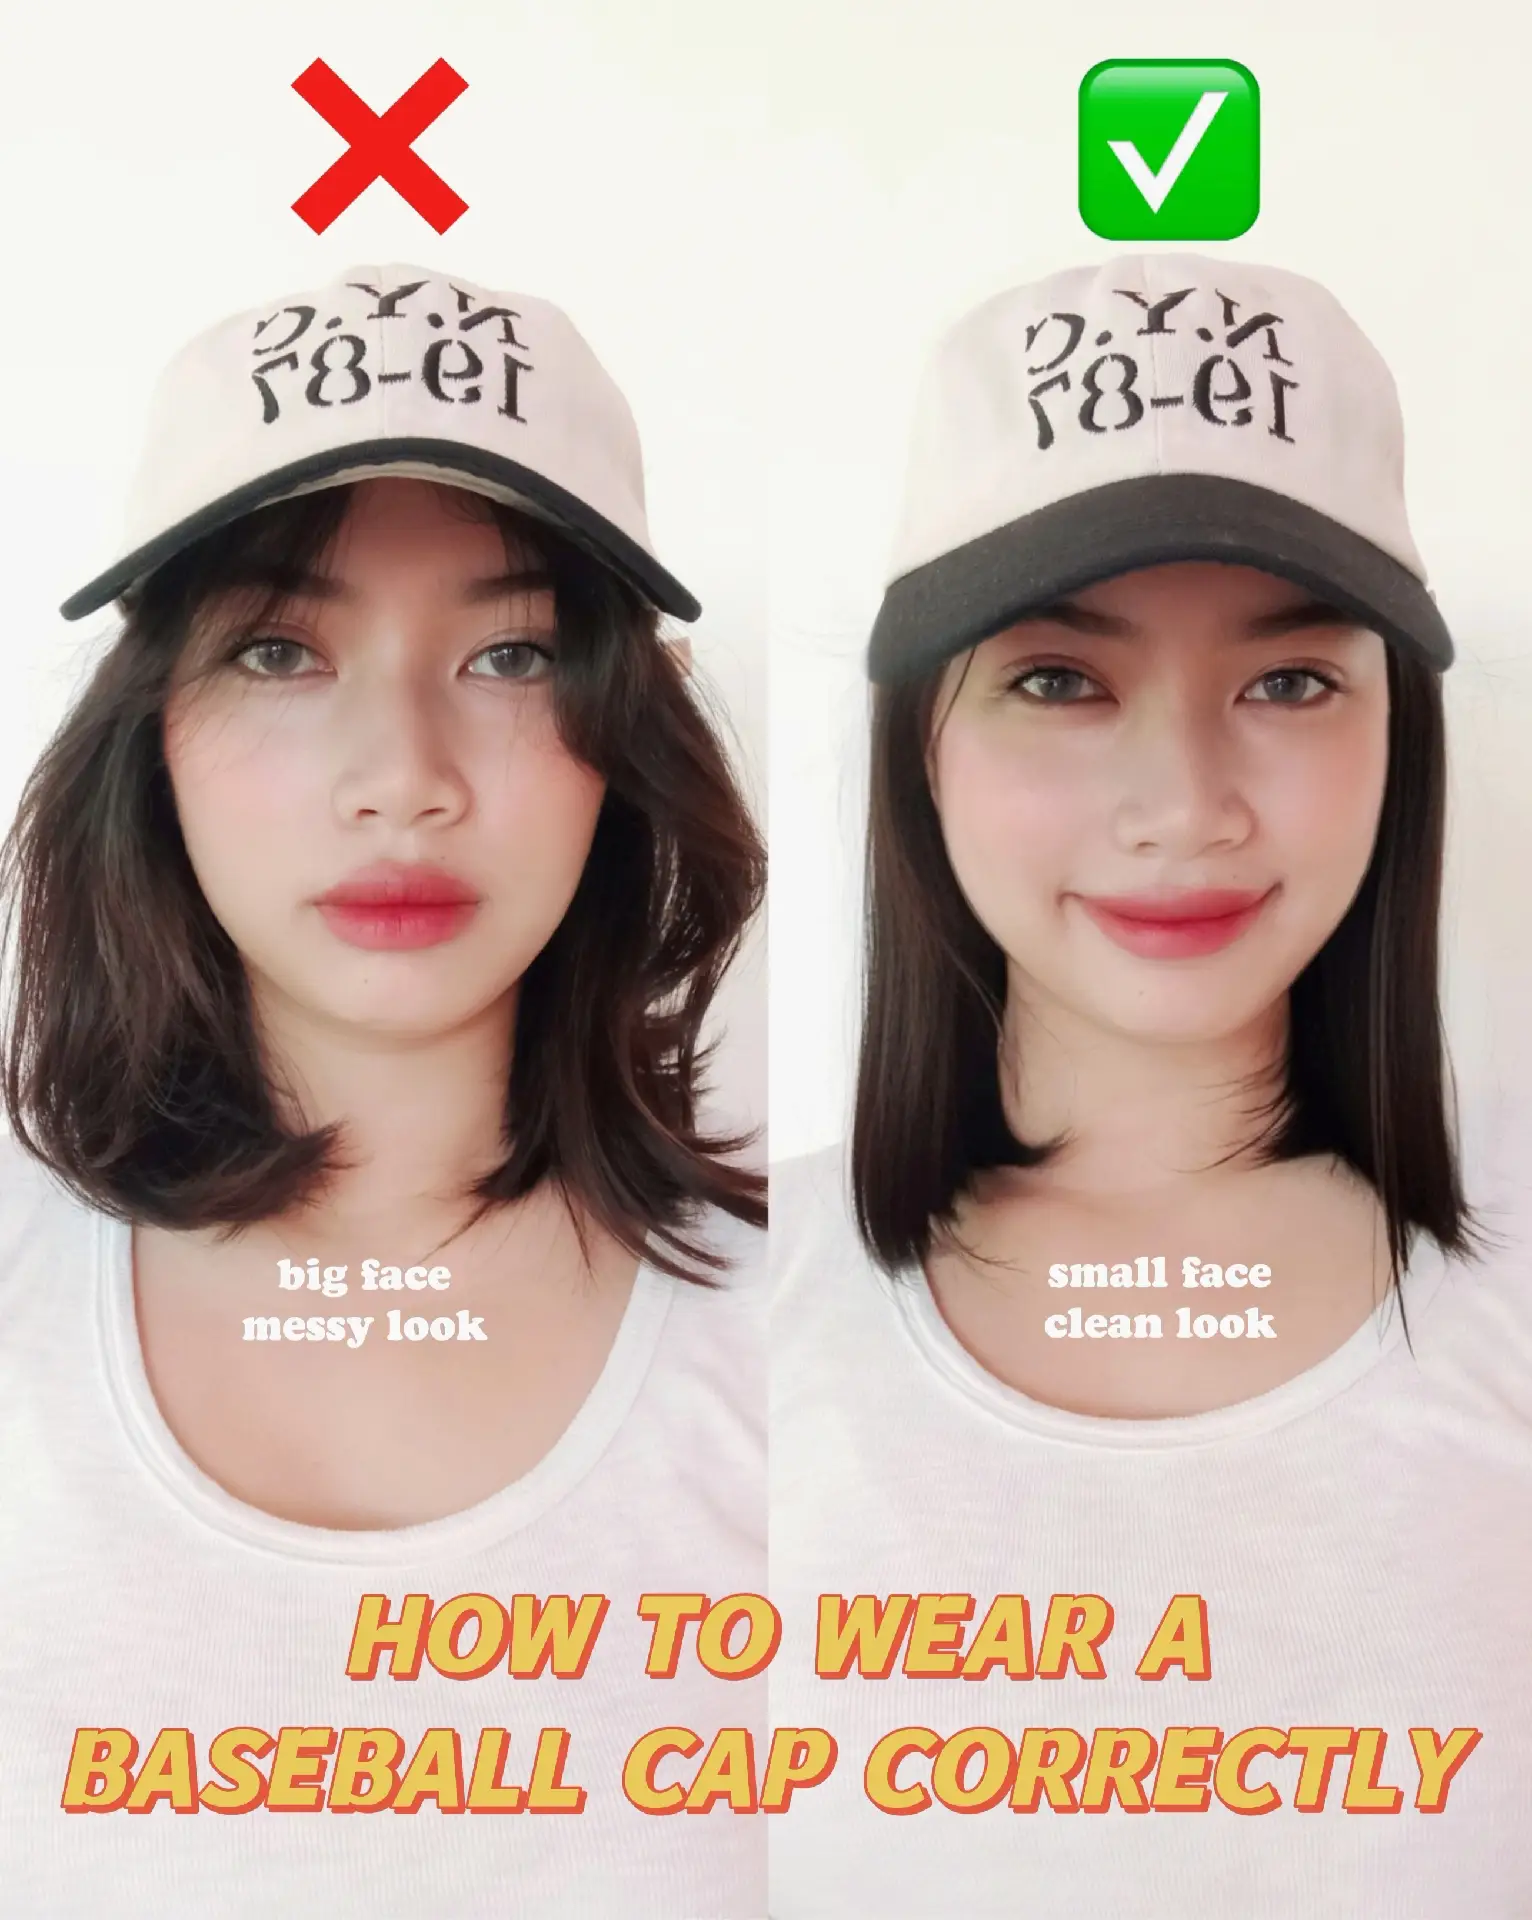 How to Wash a Baseball Cap (the Right Way)